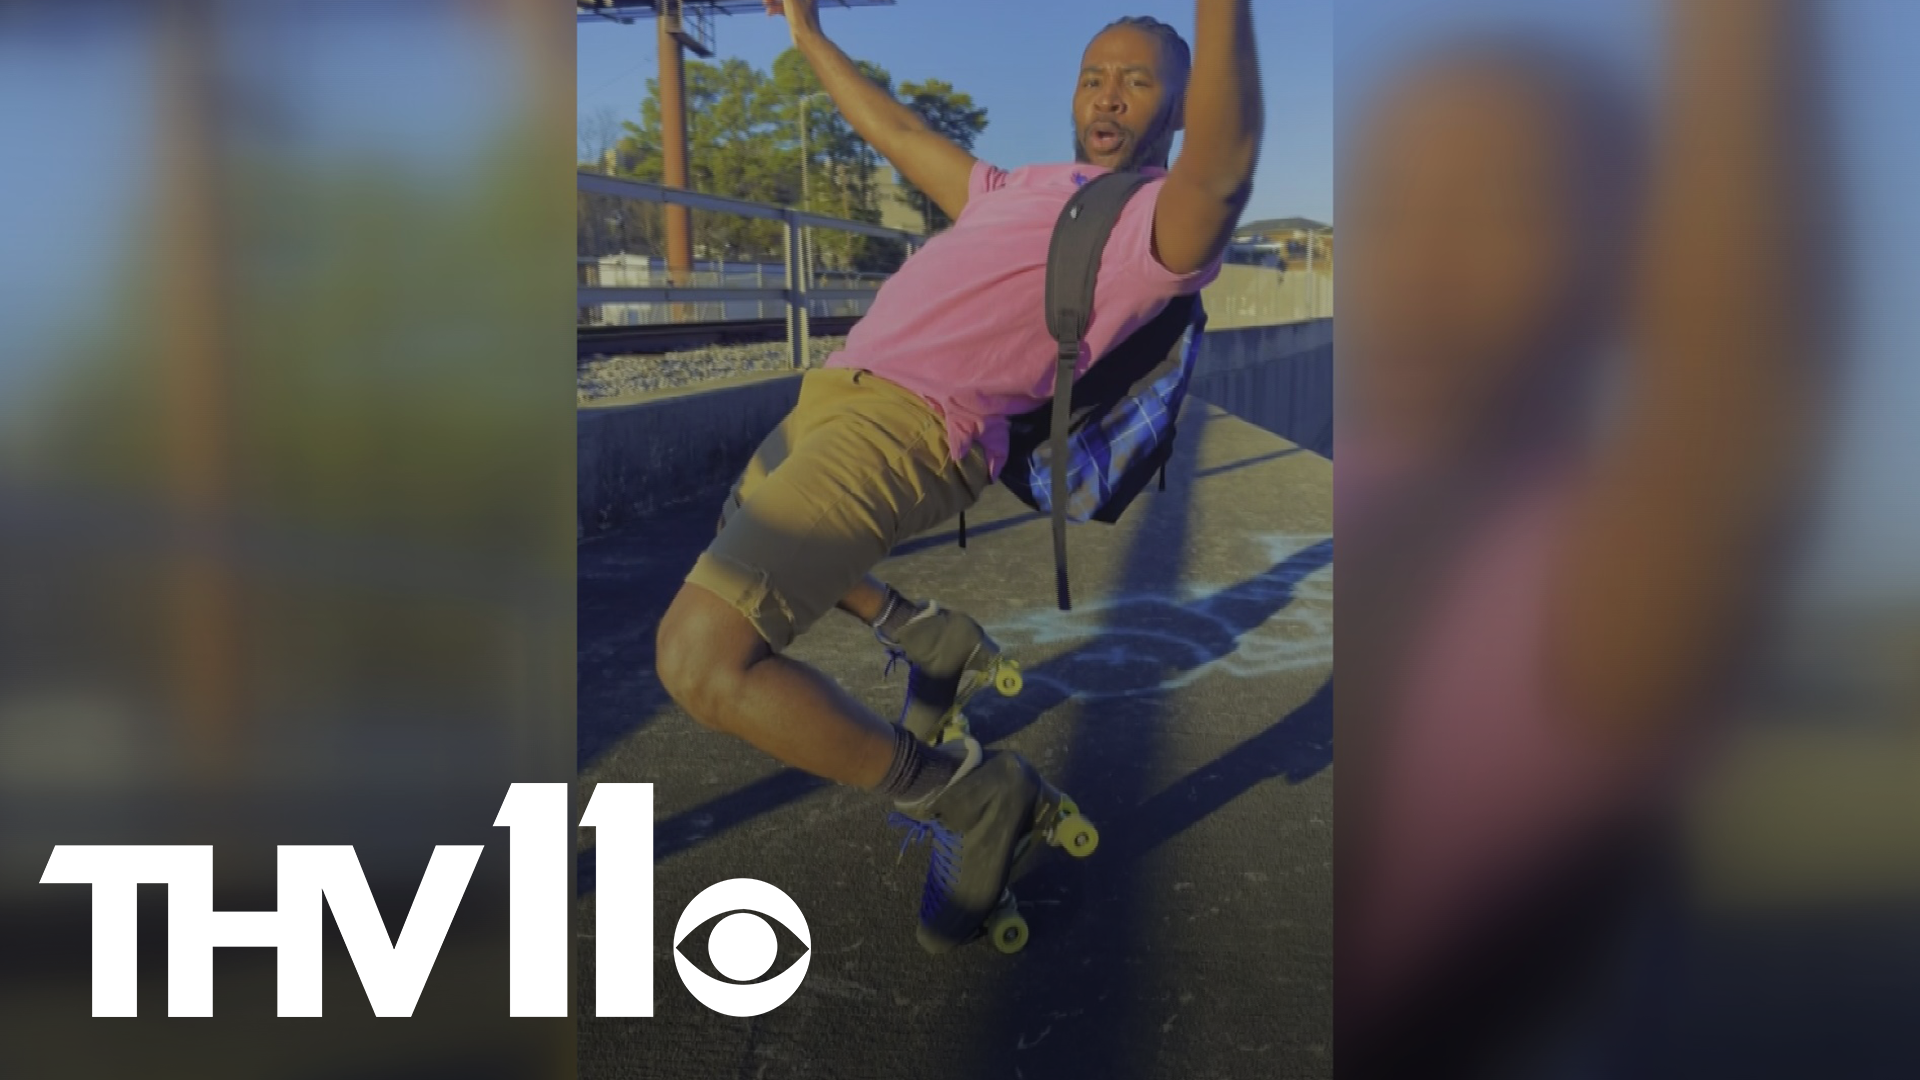 One Arkansas native has gained national recognition for his roller skating skill, and now he's working to create one of the first ever school programs.